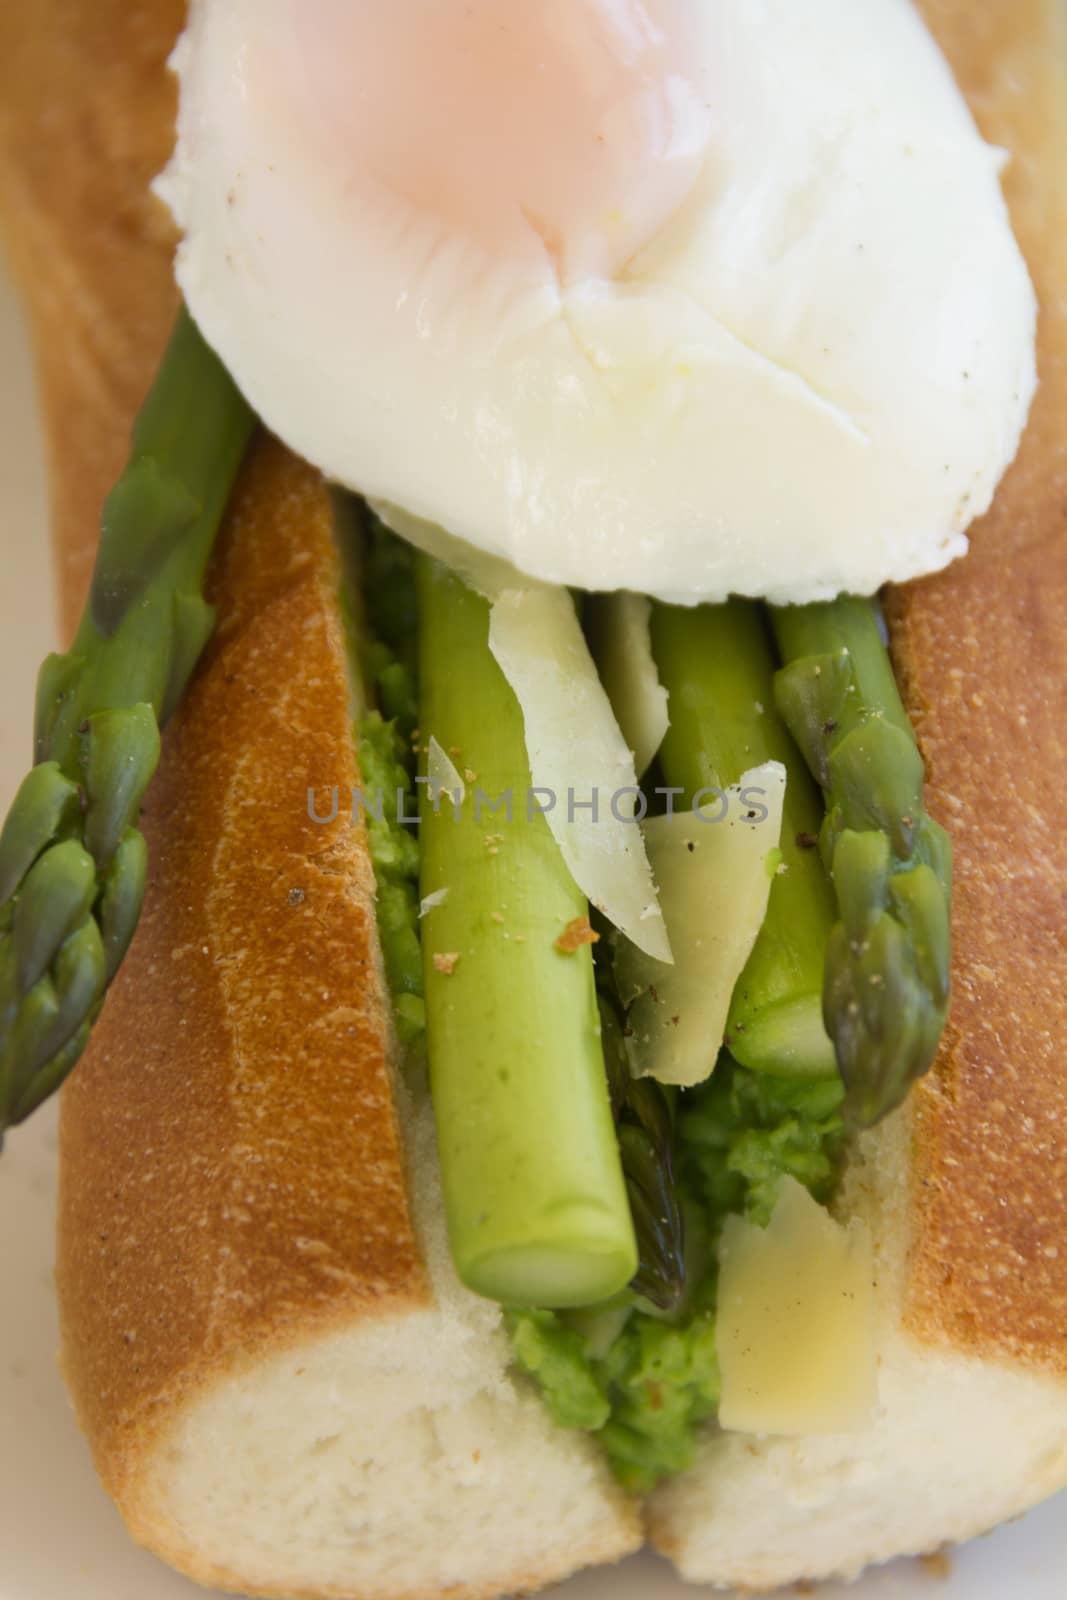 Poached Egg And Asparagus by jabiru